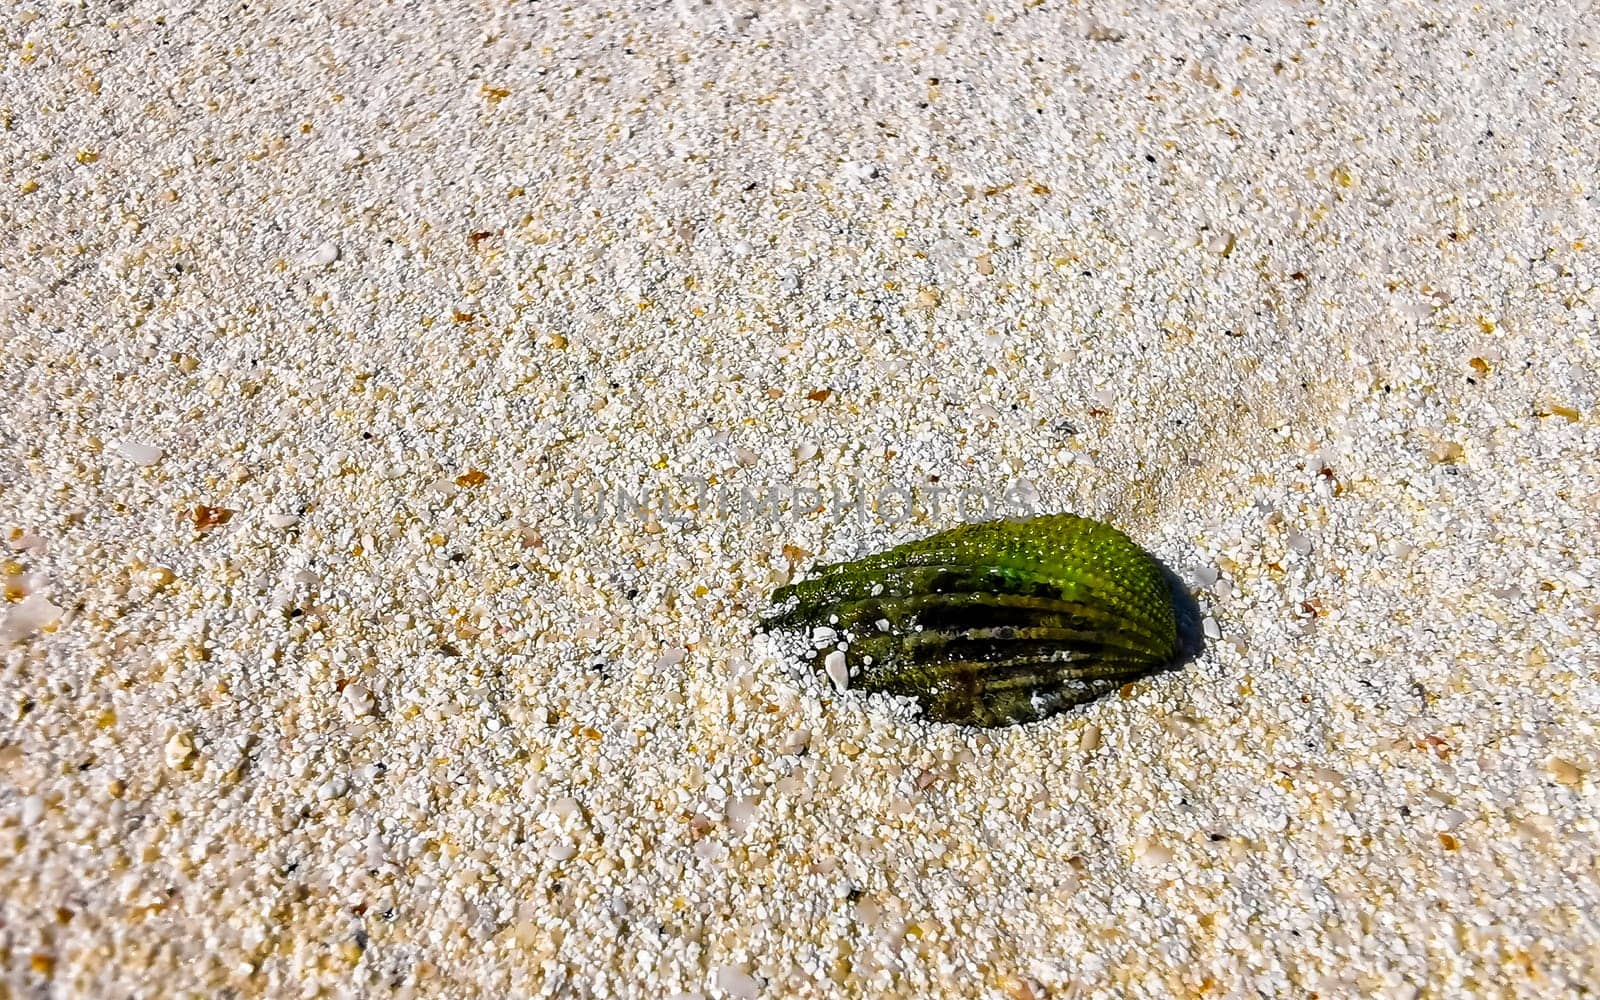 Green shell mussel on beach sand turquoise Caribbean sea Mexico. by Arkadij